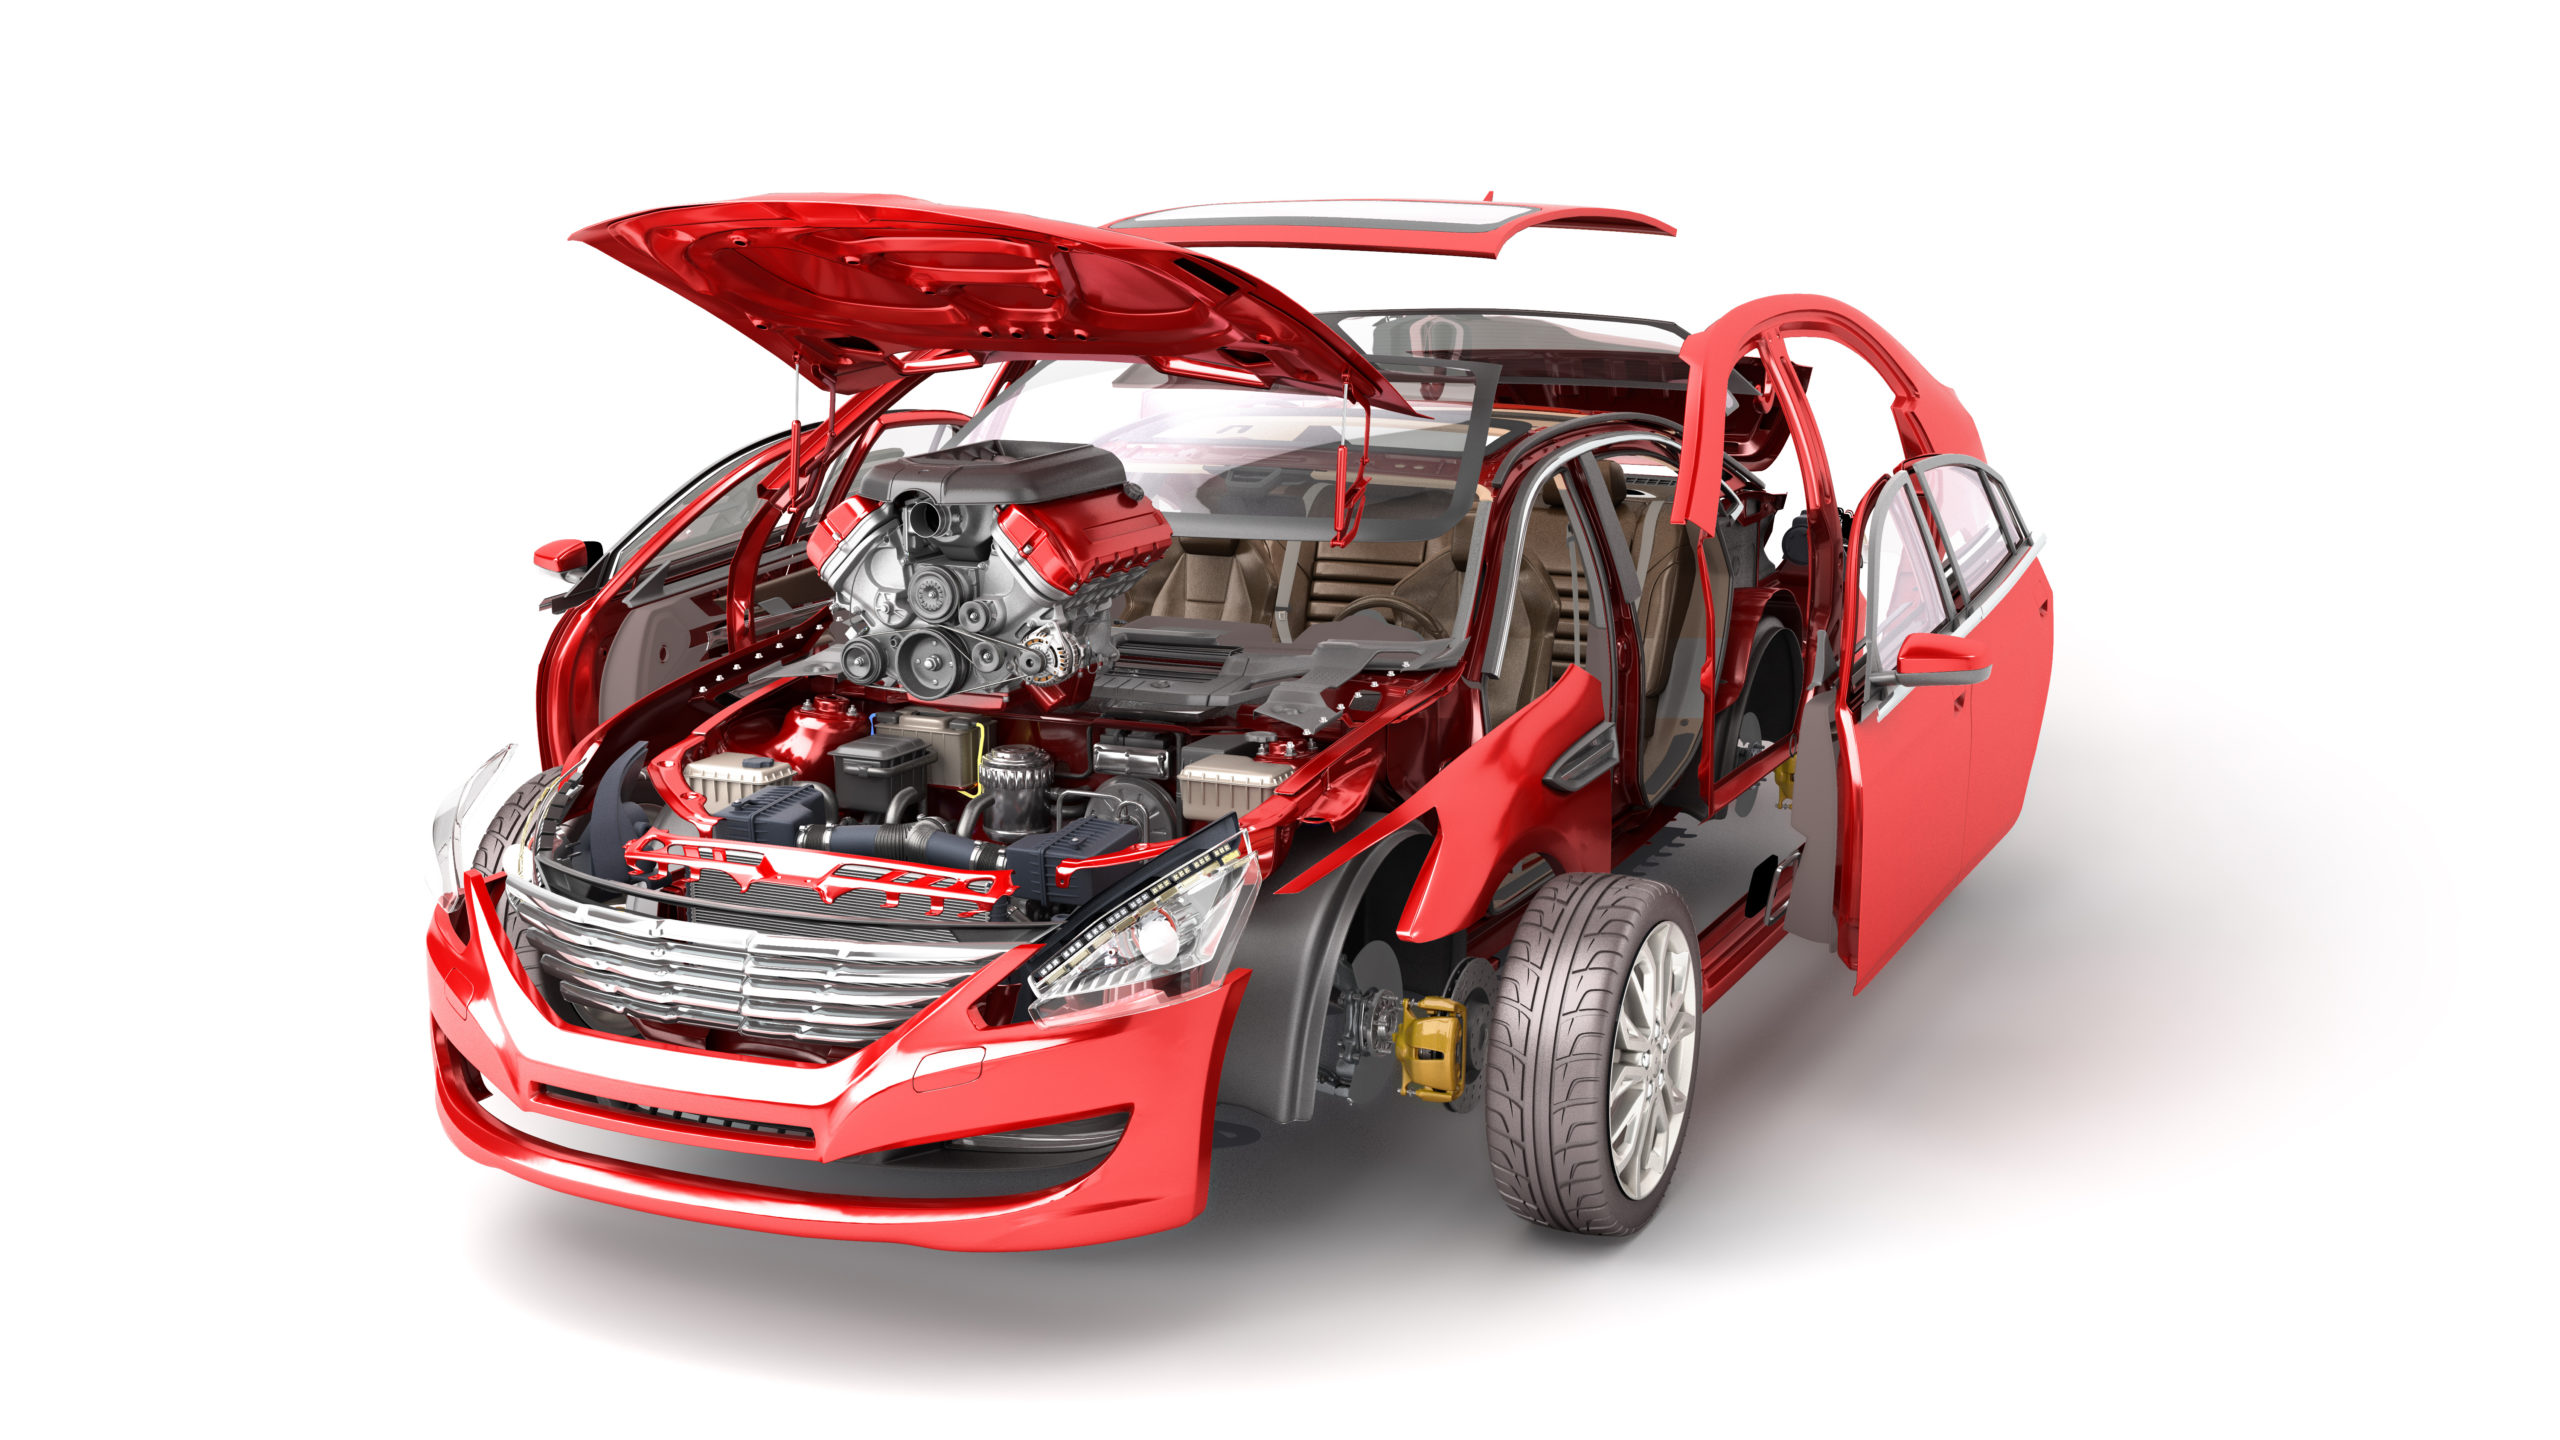 OEM vs. Aftermarket Parts: Choosing Safety First